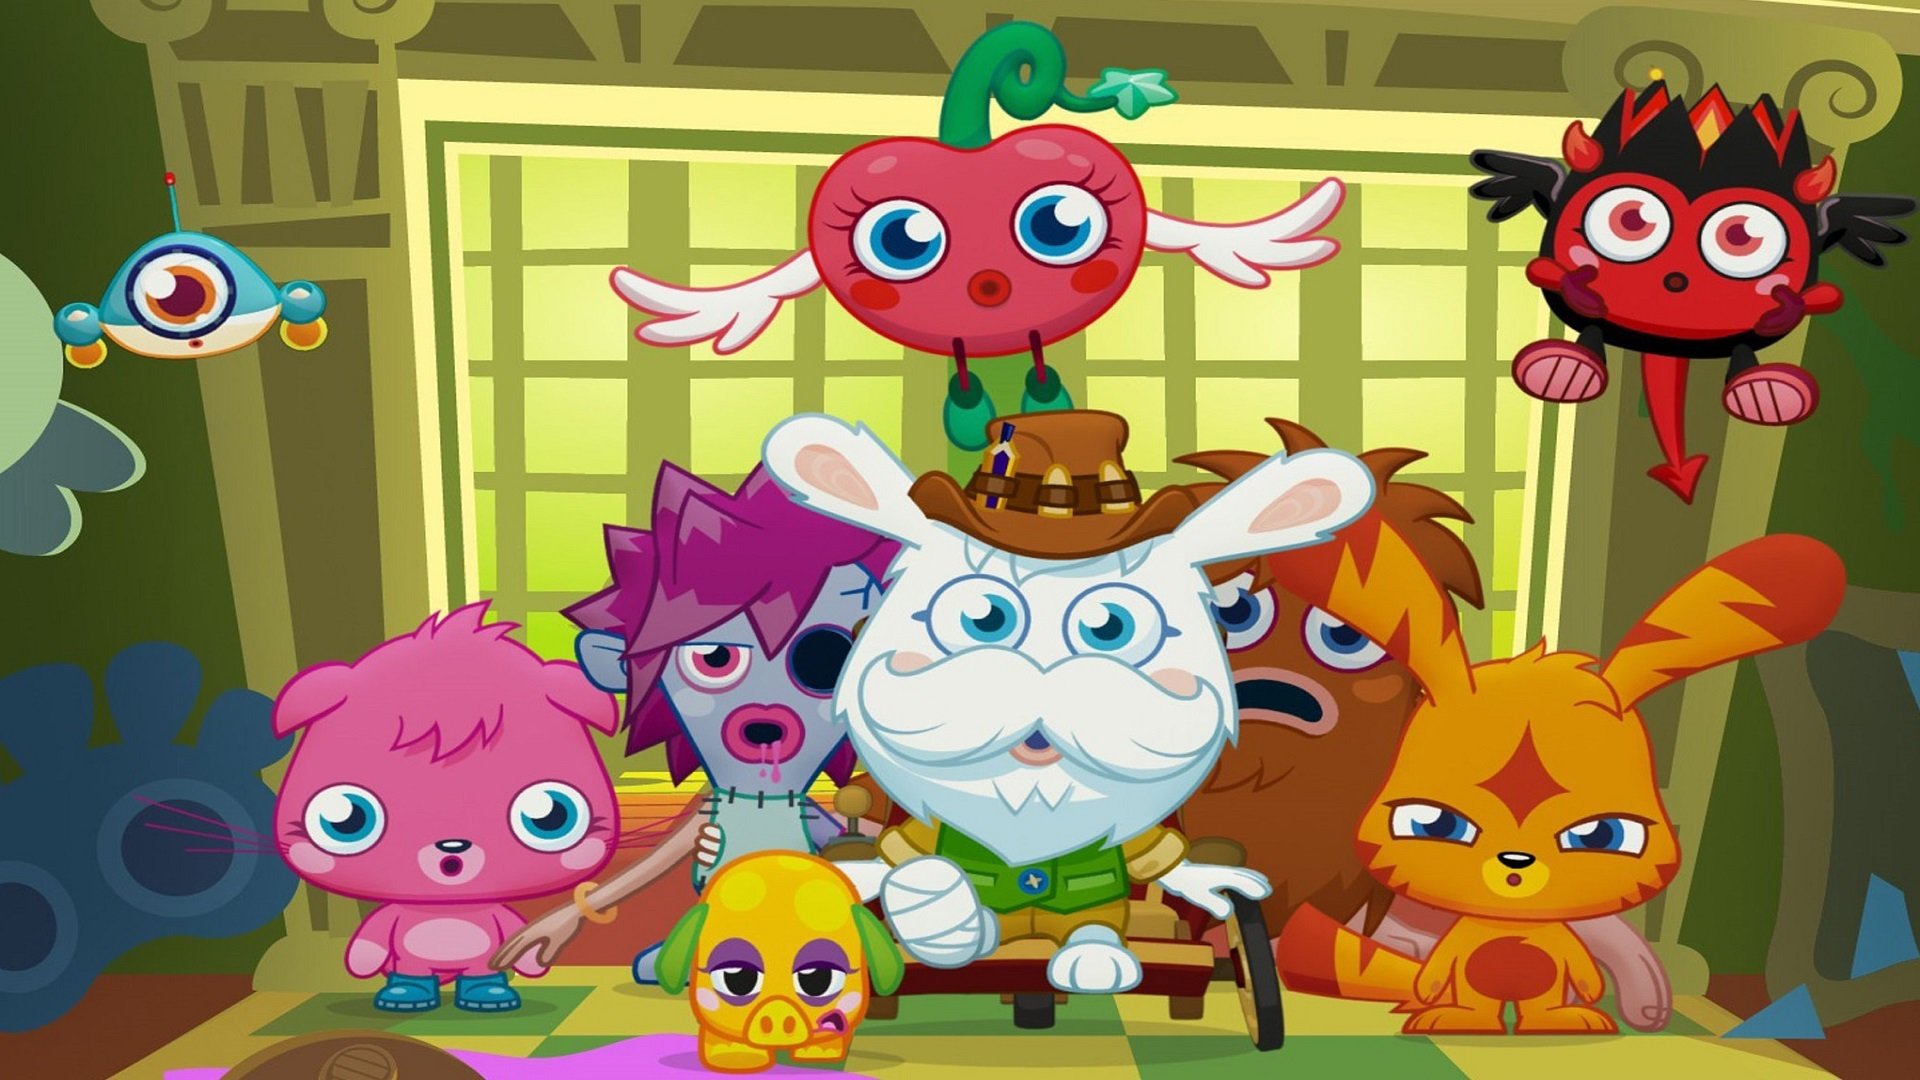 Moshi Monsters The Movie